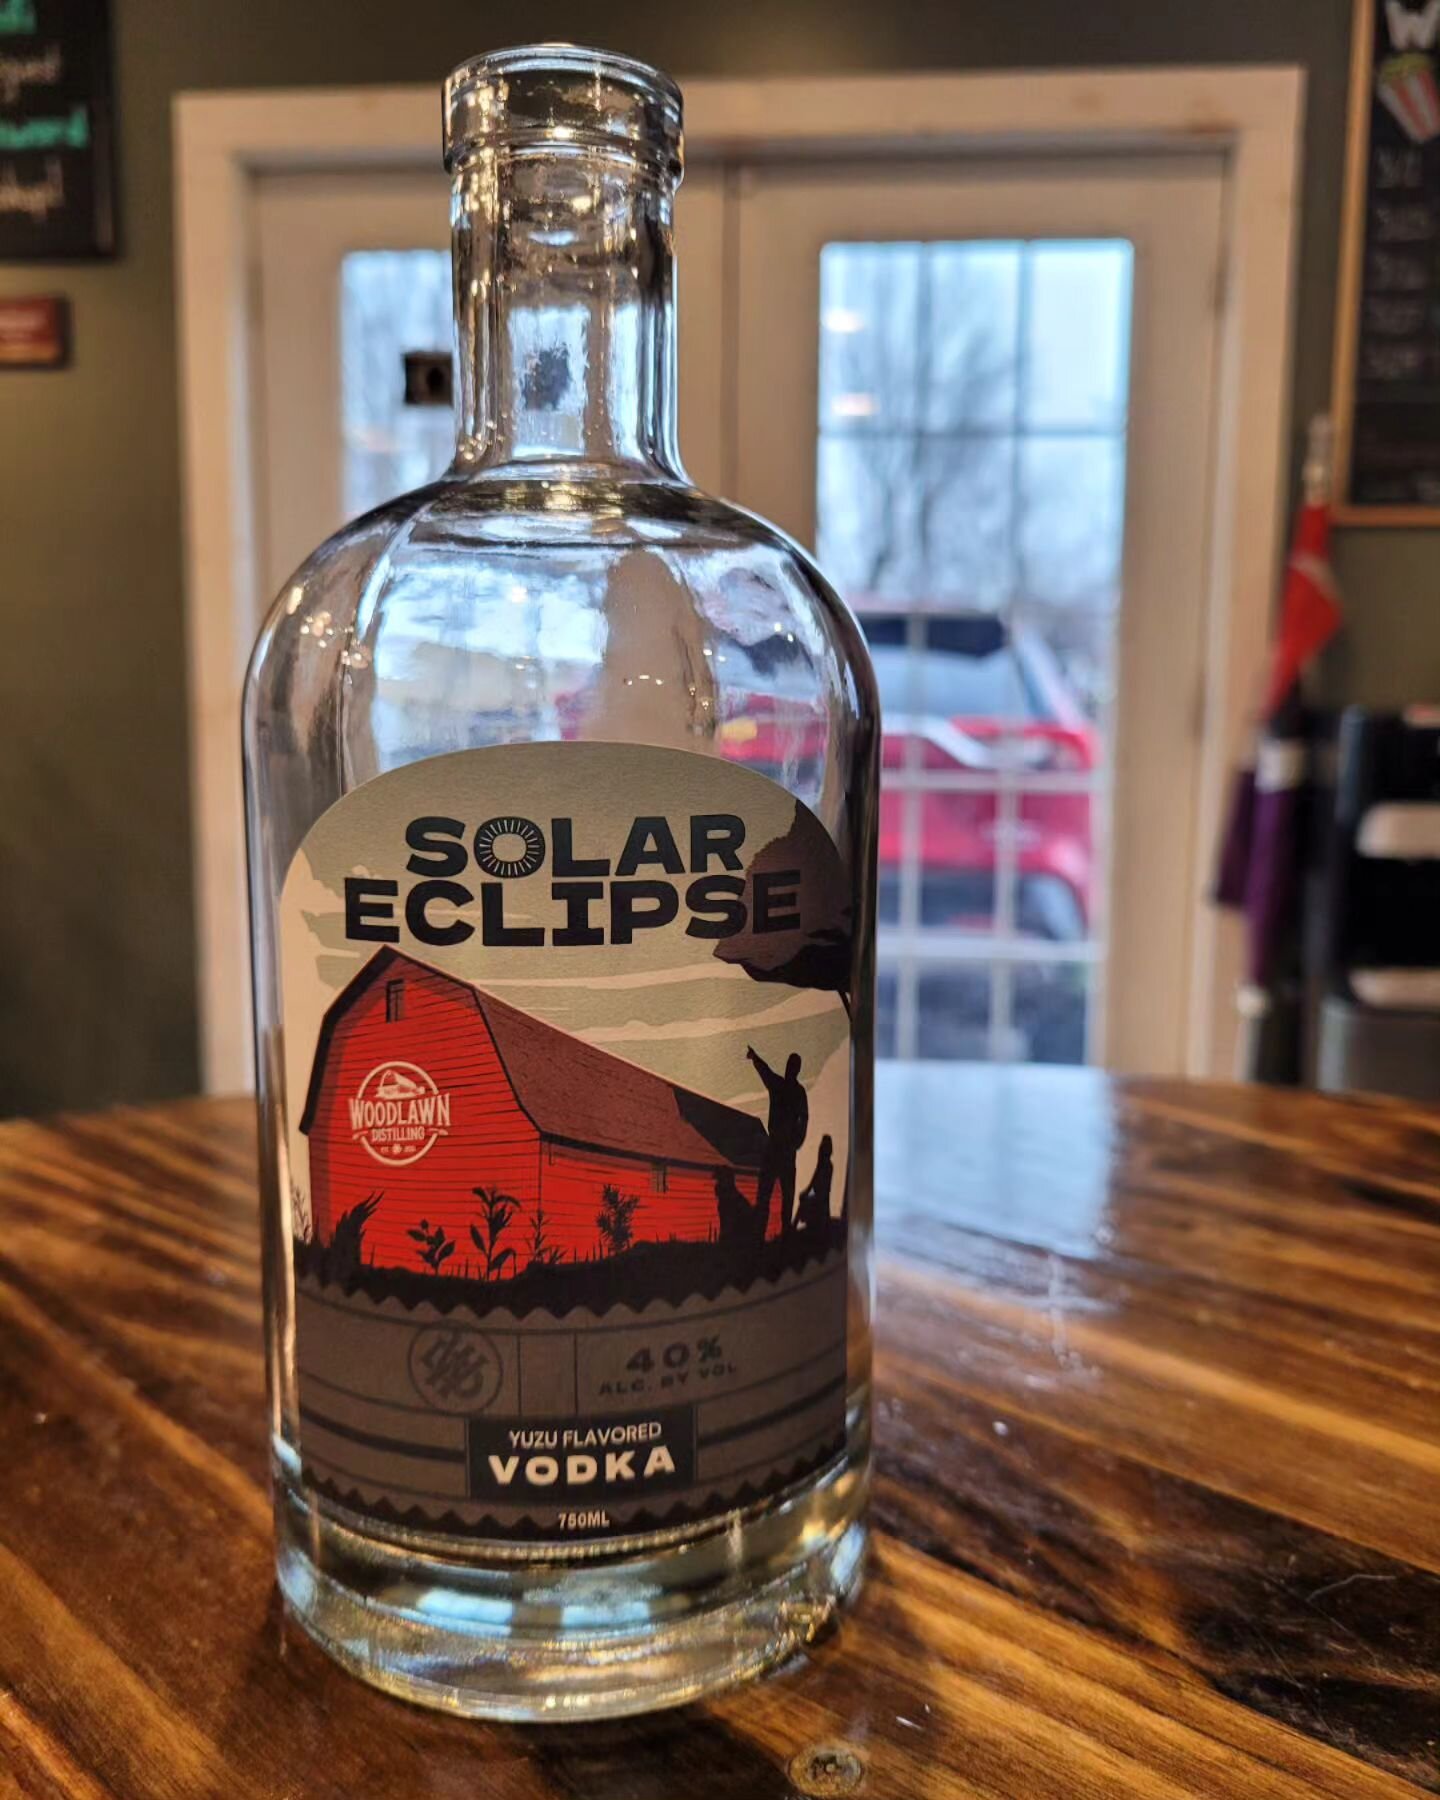 Labels are in from @niagaralabel ( and looking GREAT) and our limited-release Yuzu Vodka is getting bottled for the Solar celebration kicking off this weekend in honor of the Solar Eclipse on Monday, April 8th!